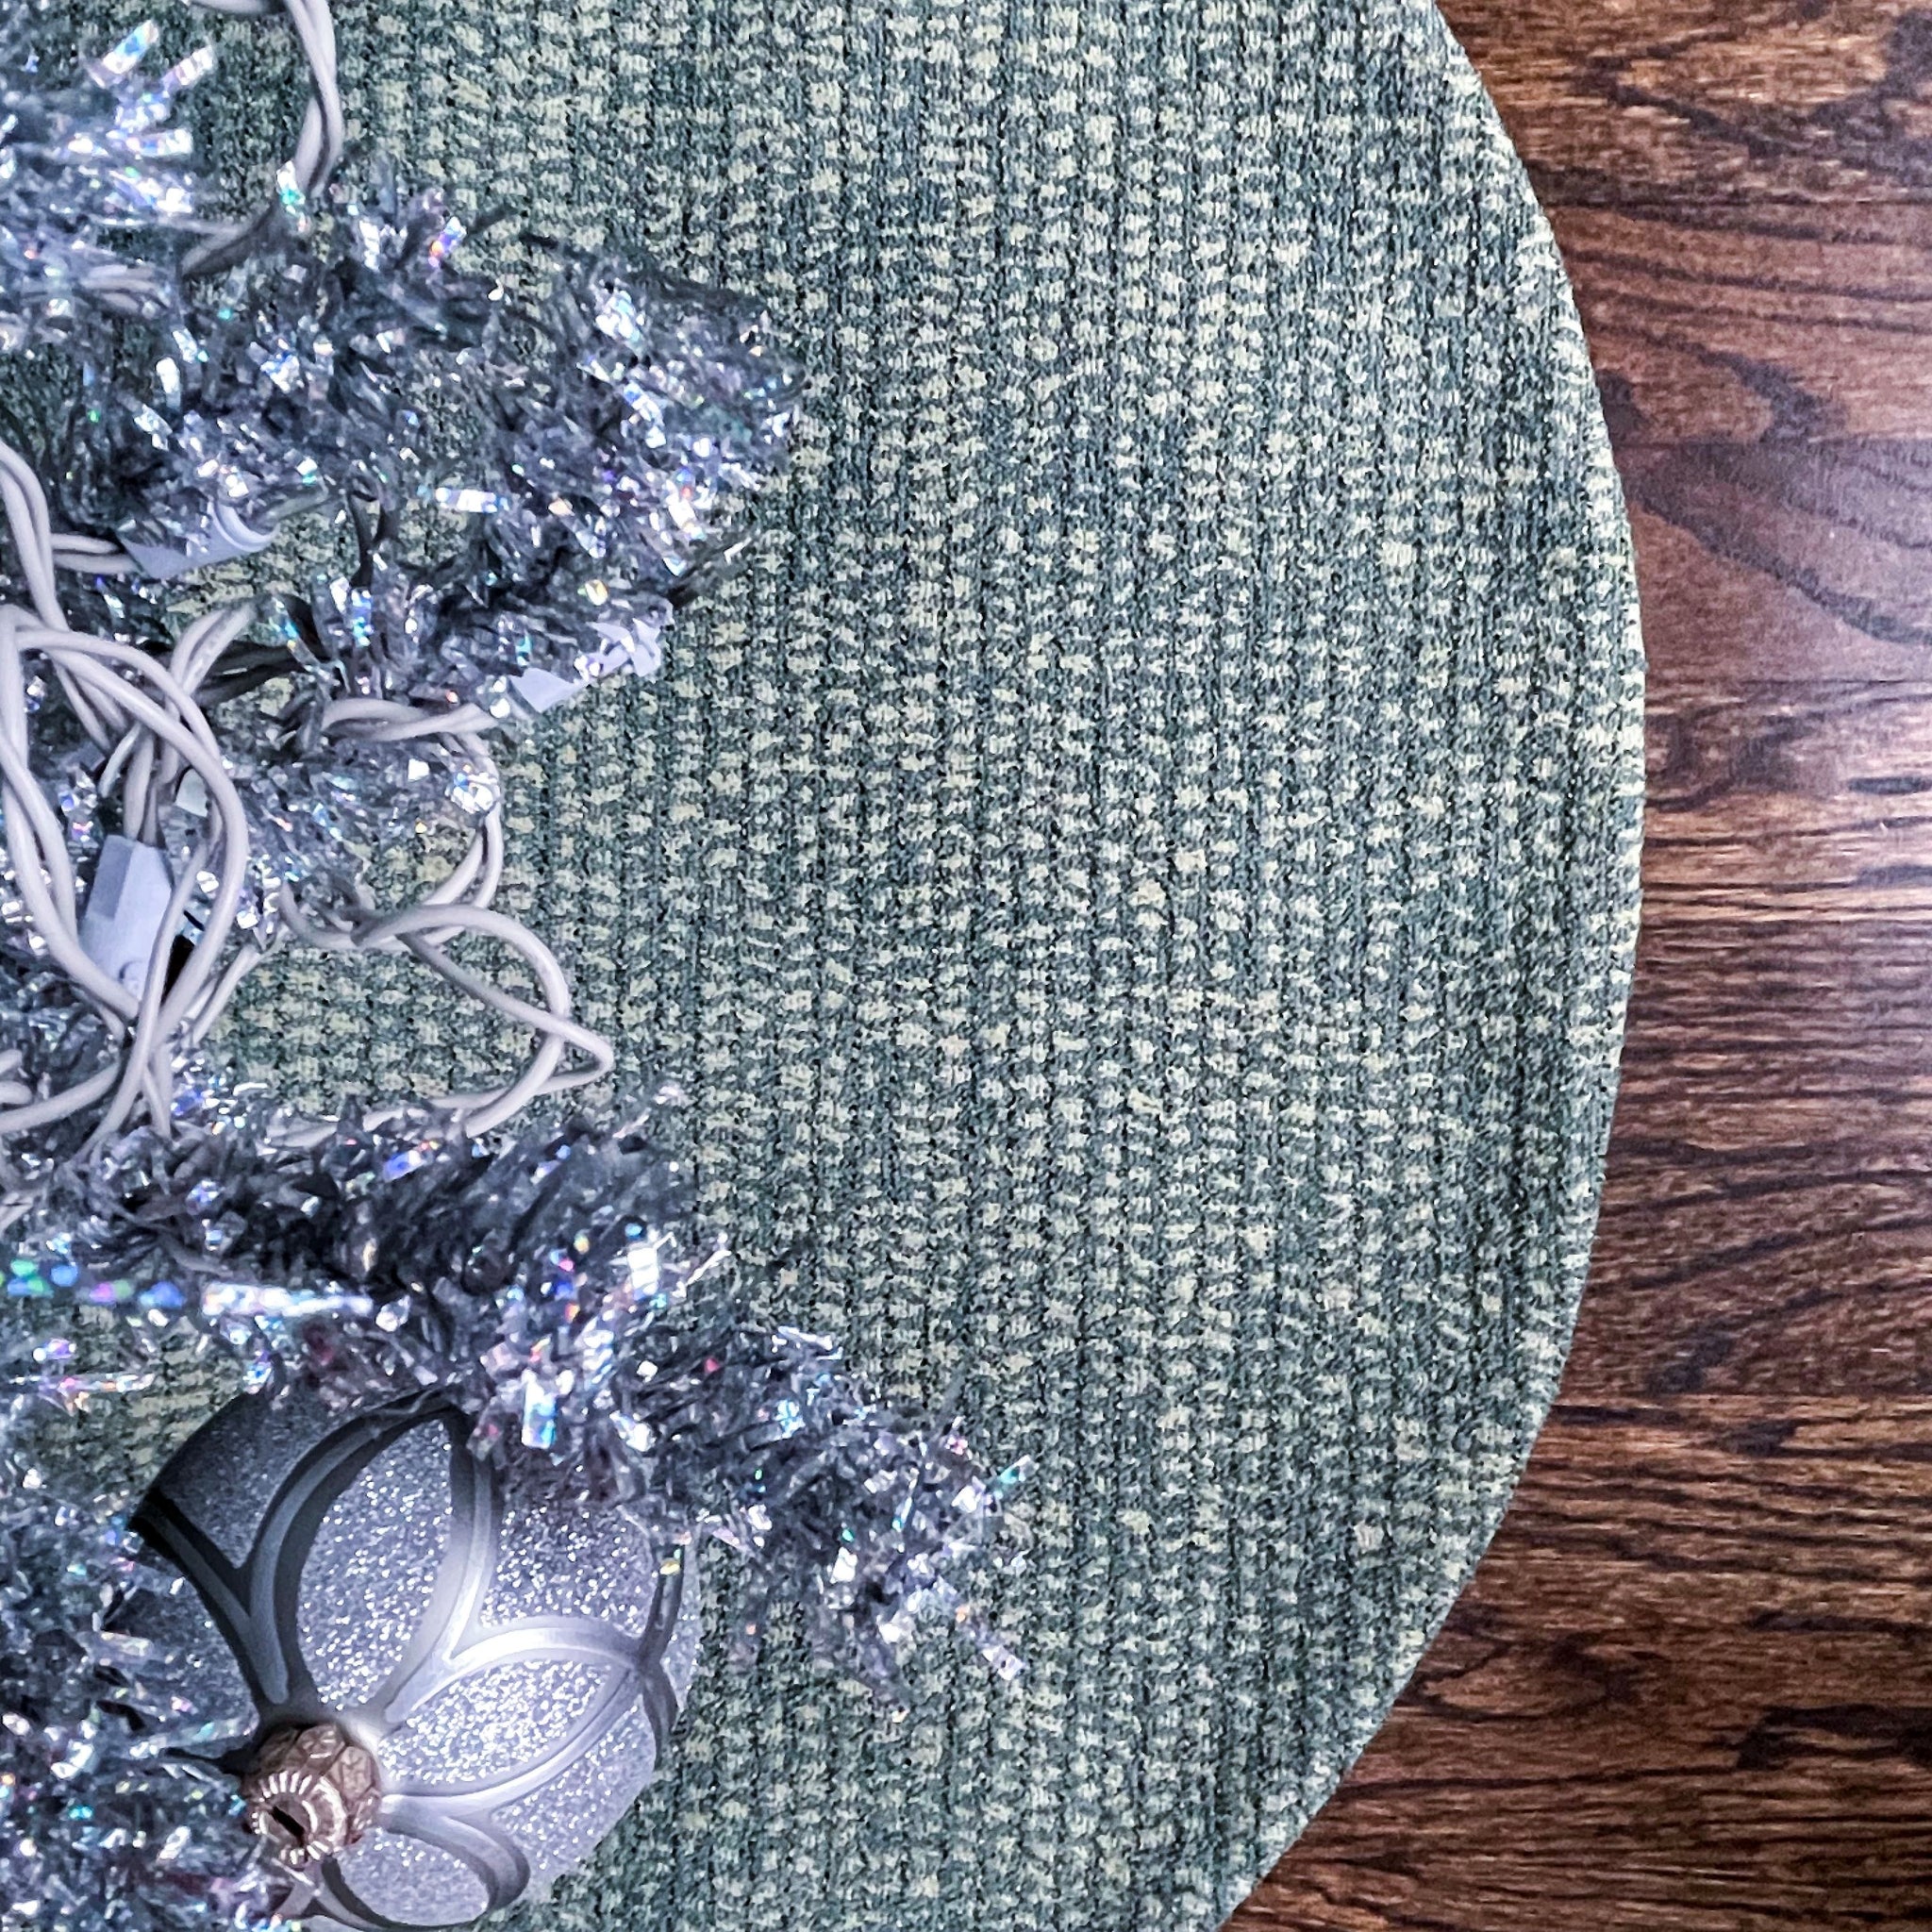 30"Neutral Brocade and Green Christmas Tree Skirt | Reversible